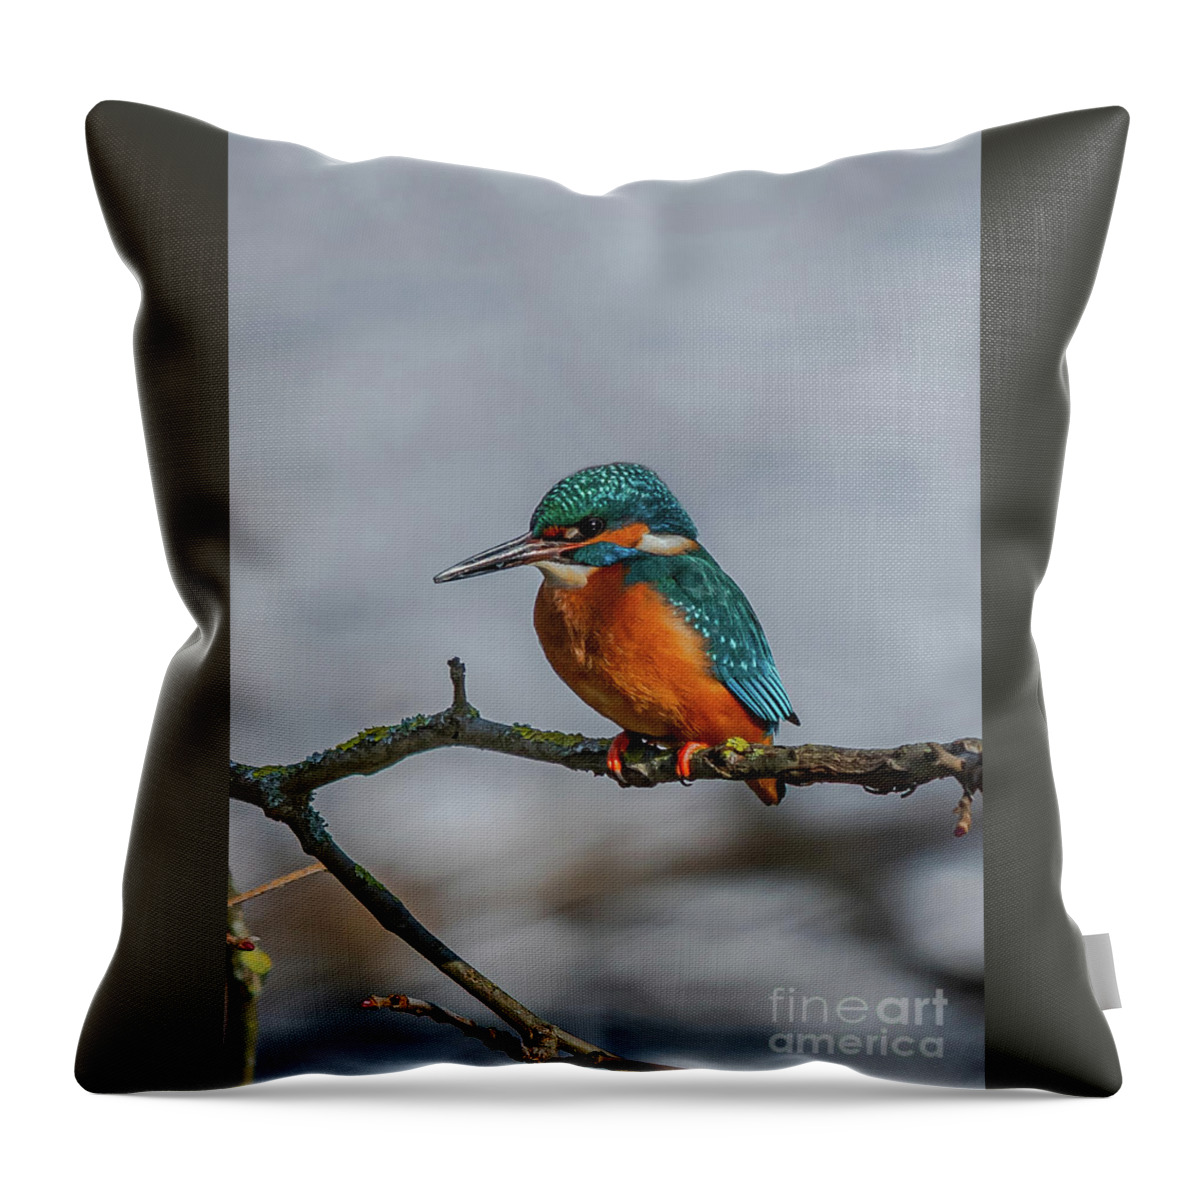 Kingfisher Throw Pillow featuring the photograph Common Kingfisher, Acedo Atthis, Sits On Tree Branch Watching For Fish by Andreas Berthold